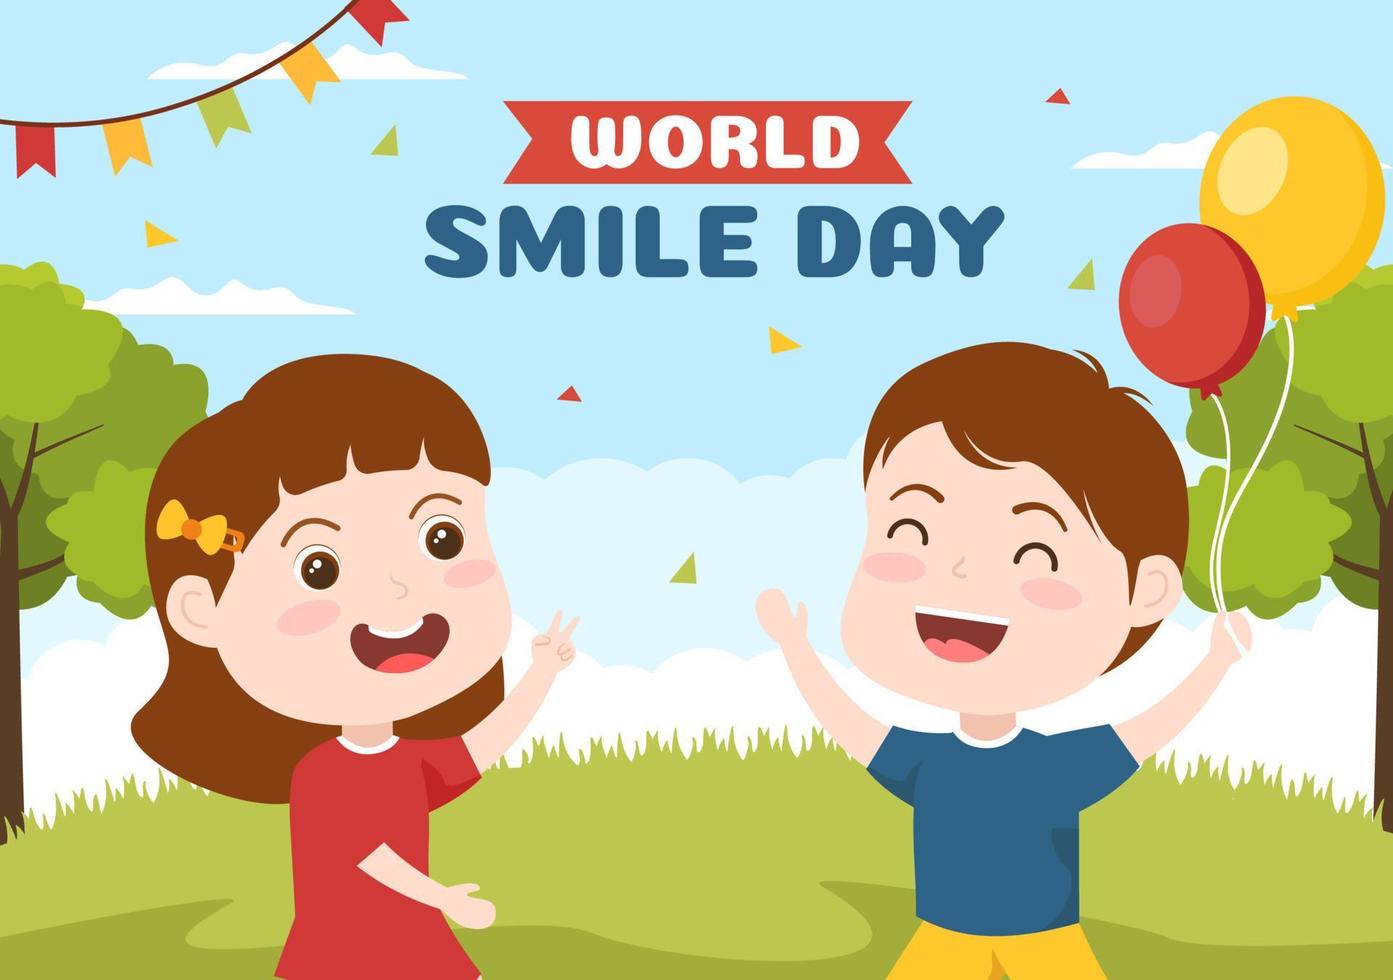 World Smile Day Hand Drawn Cartoon Illustration with Smiling Children and Happiness Face in Flat Style Background vector